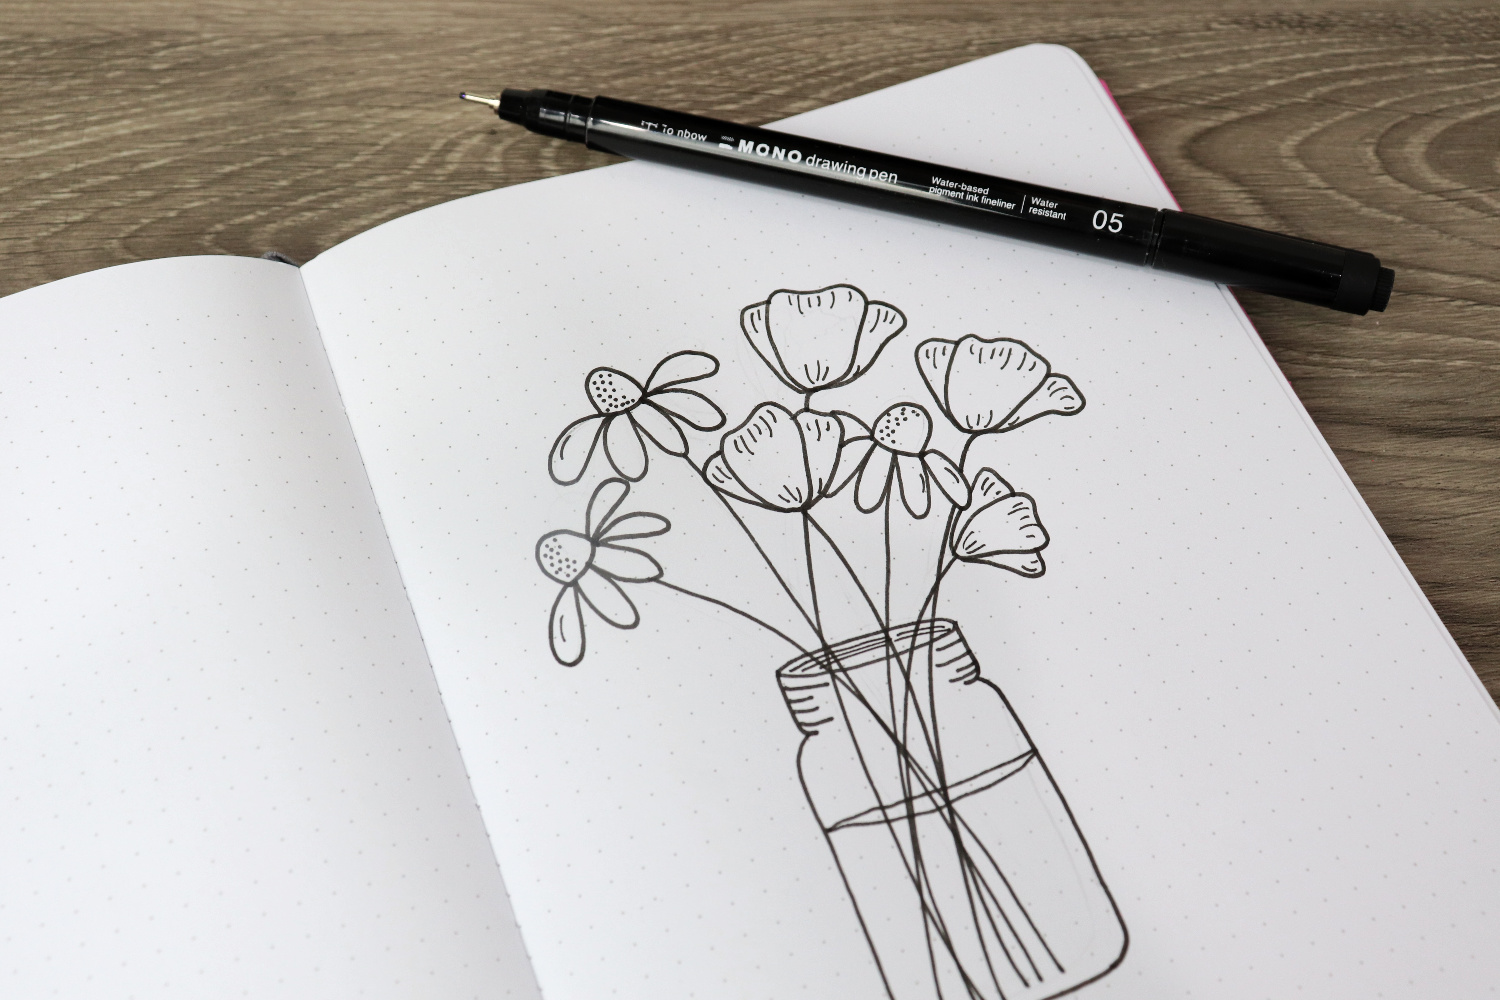 Image contains an open sketchbook with a bouquet of flowers in a mason jar drawn in black ink. A MONO Drawing Pen 05 sits on top of the page.